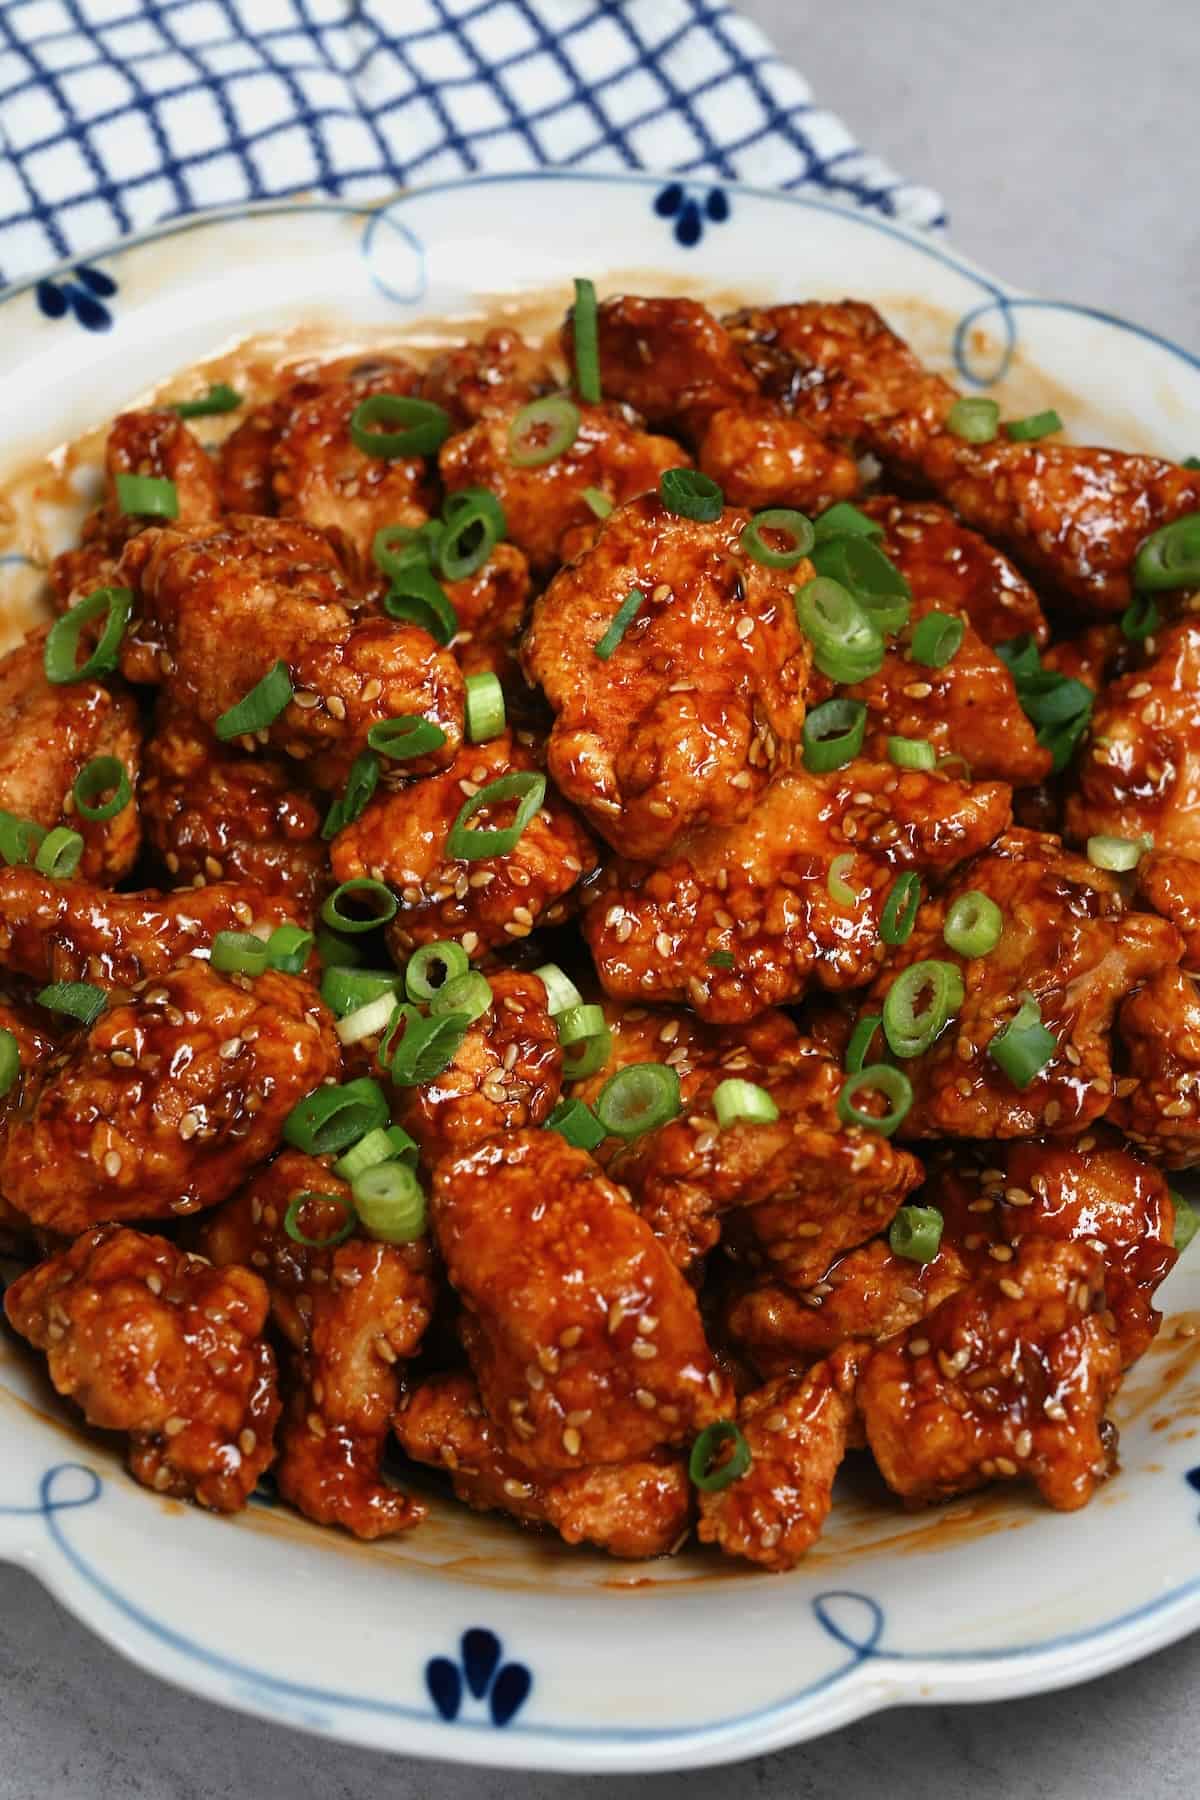 Sesame chicken topped with chopped scallions